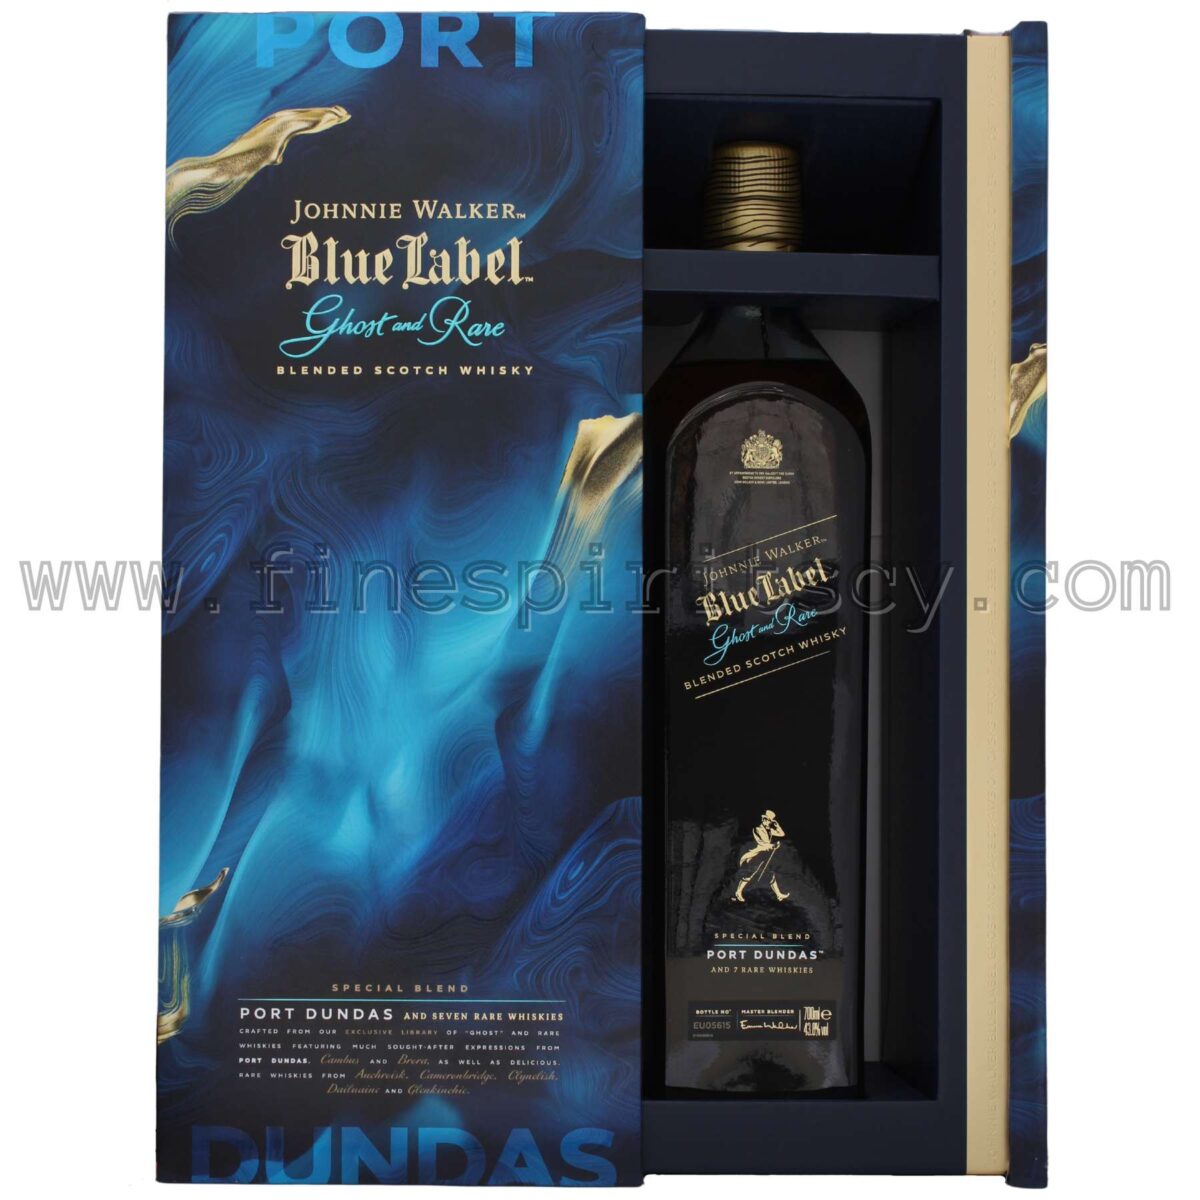 JW Blue Label Rare Old Discontinued Whisky Box Cyprus Online CY Open Bottle